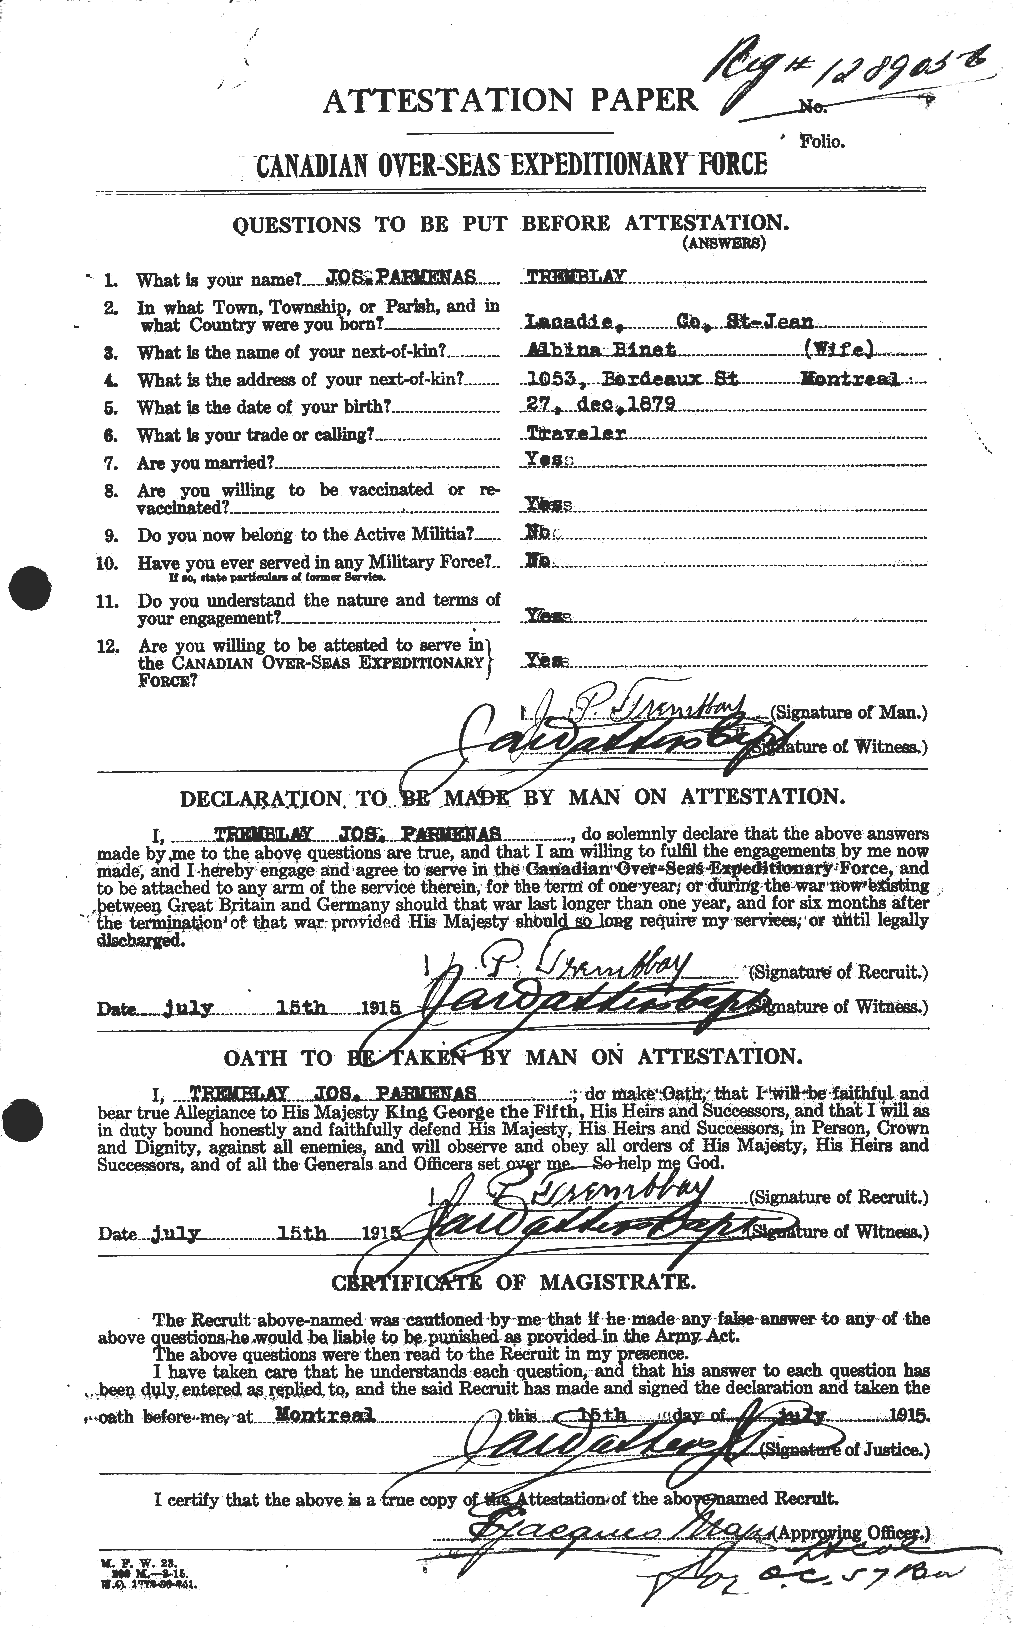 Personnel Records of the First World War - CEF 639164a